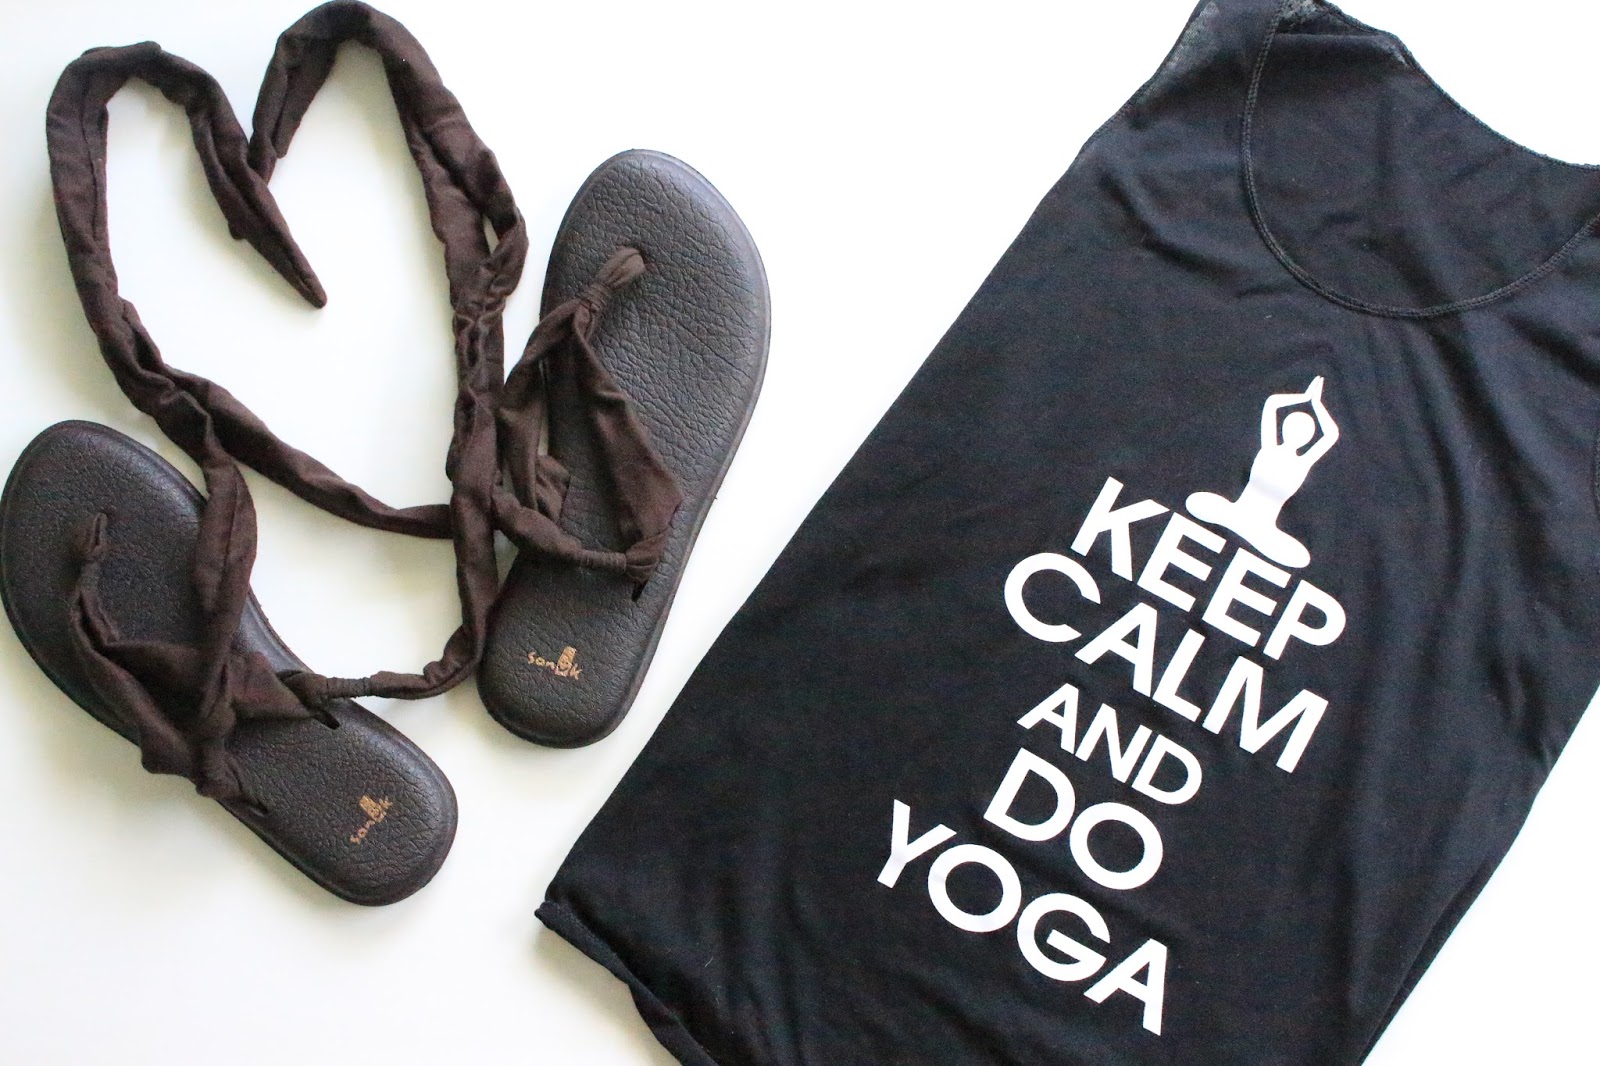 Taking Yoga with Me Everywhere  Sanuk Yoga Mat Sandals Review